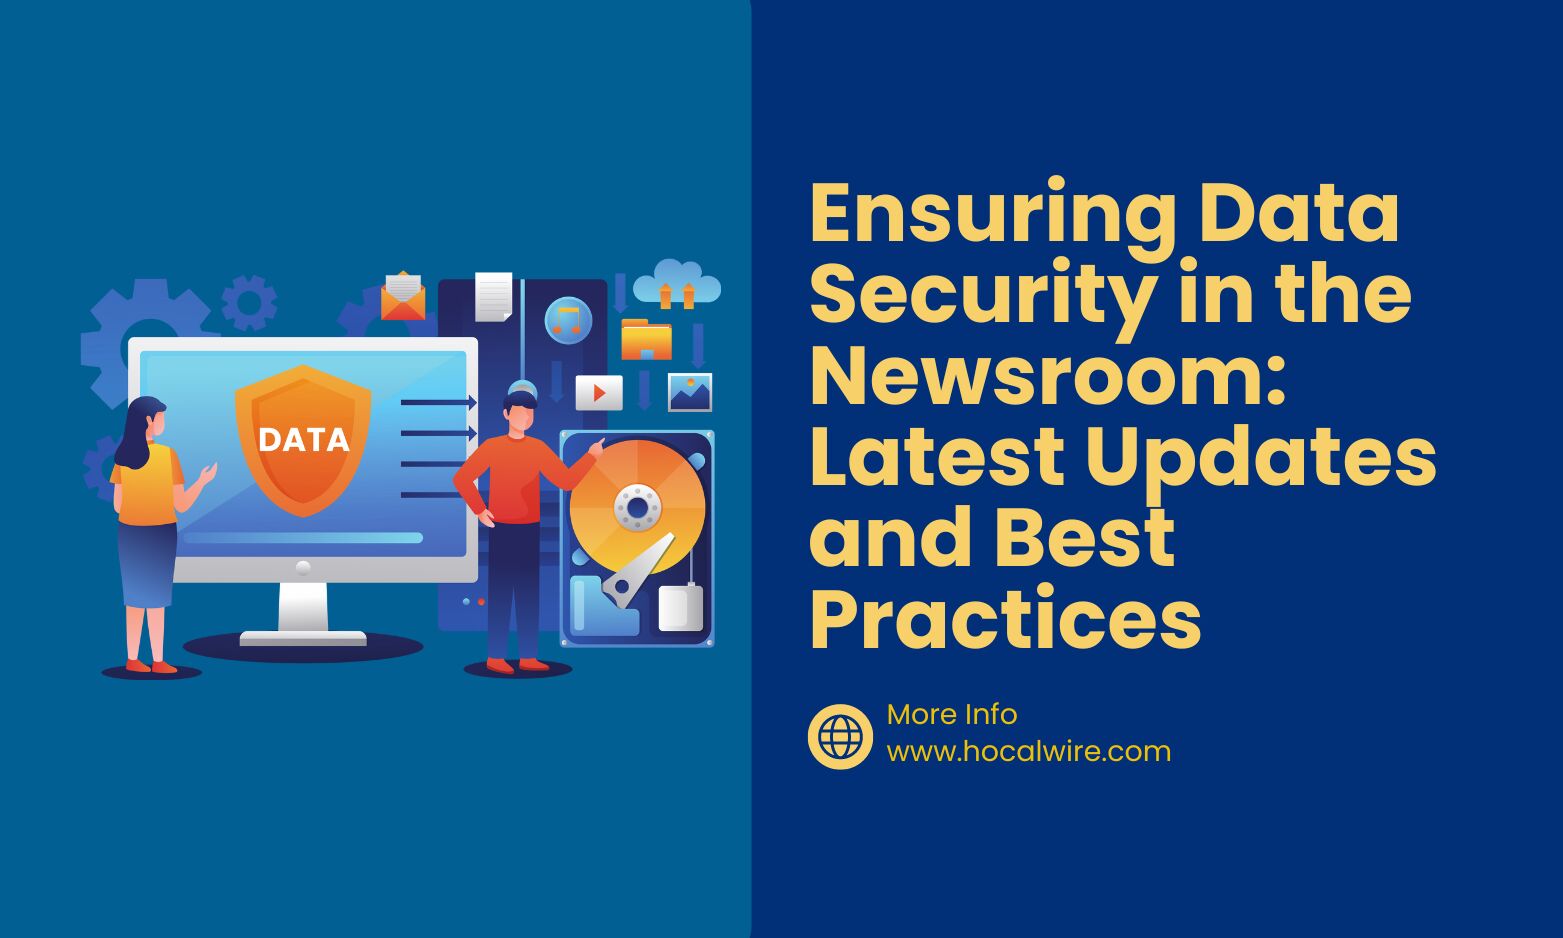 Ensuring Data Security in the Newsroom: Latest Updates and Best Practices